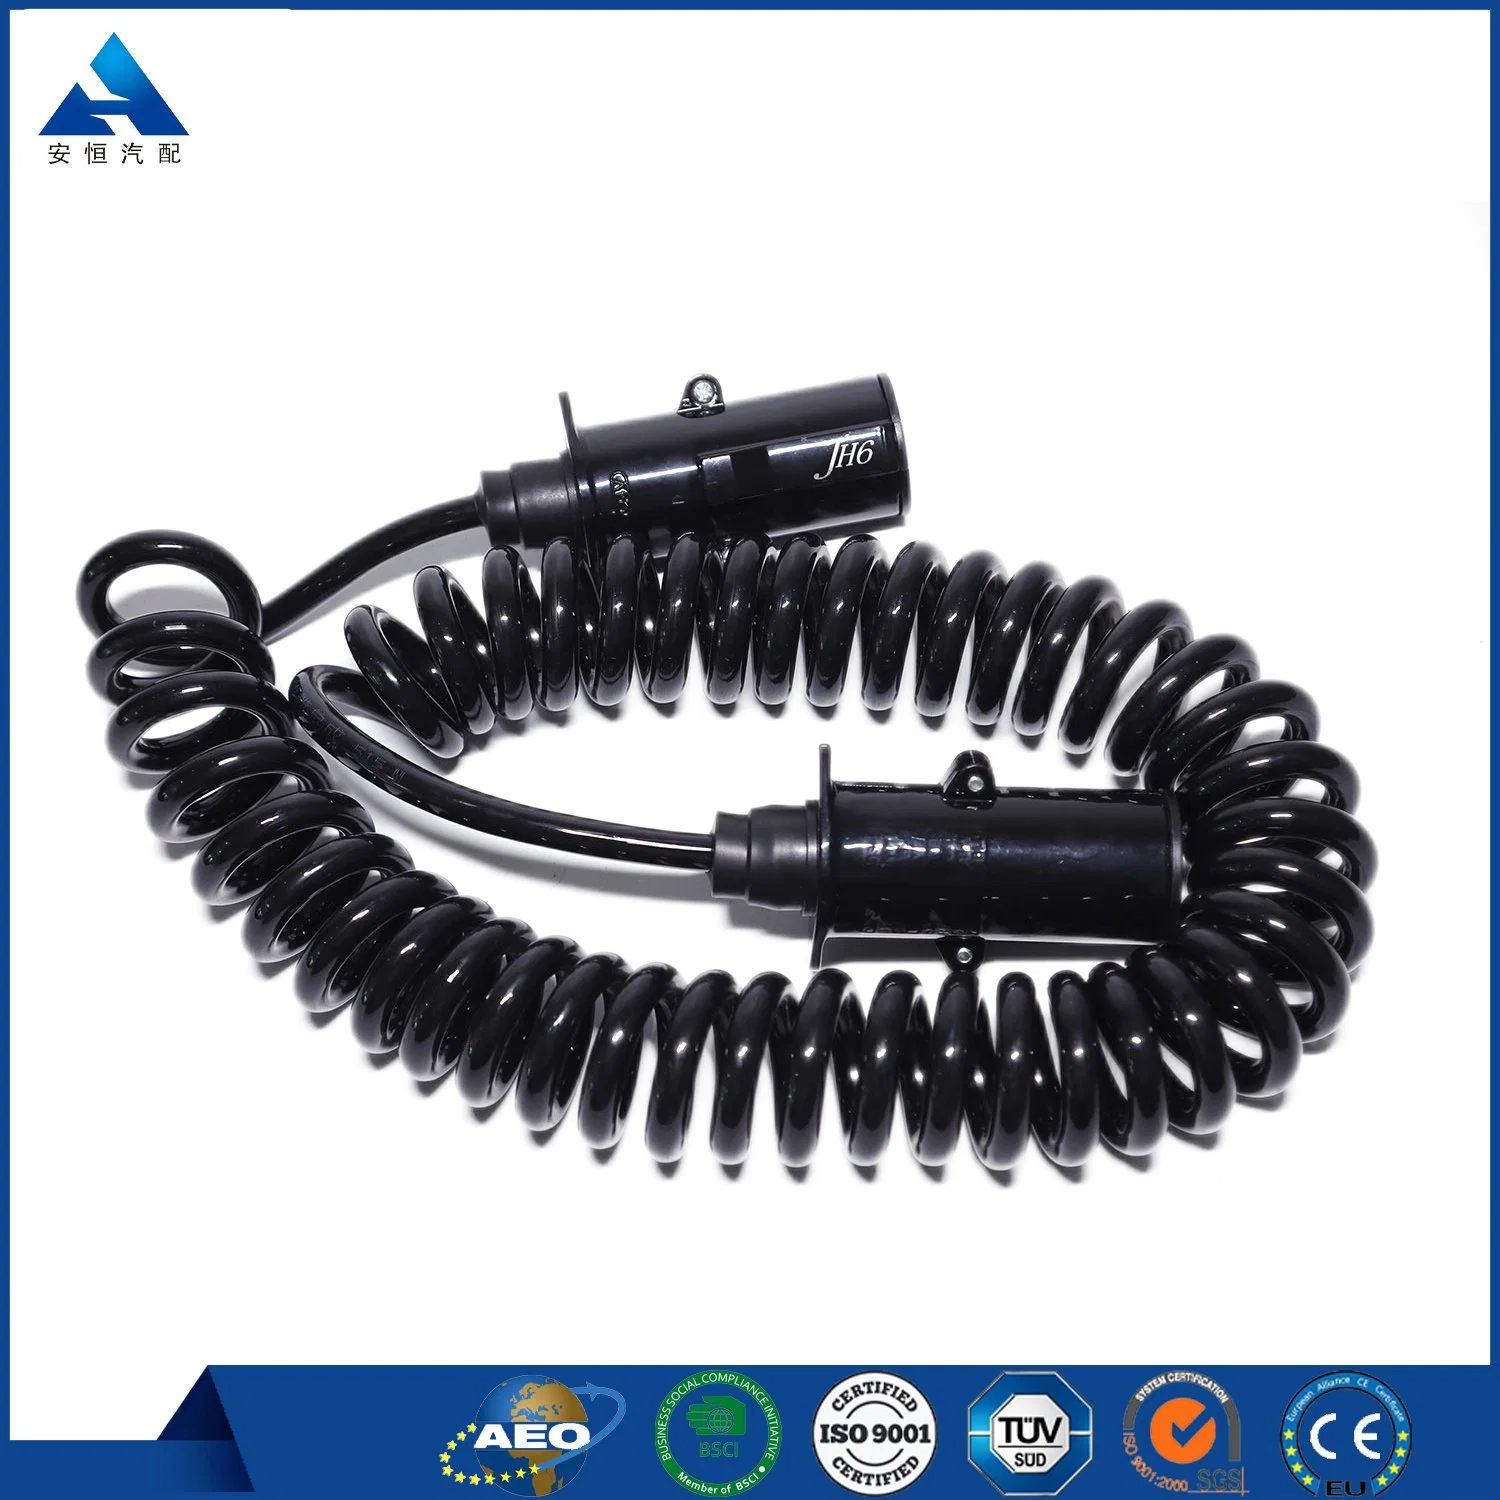 Truck Nylon Trailer Wire 7m Black Electrical Seven Core Spring Suzie Coil Spiral Power Cable for Sell